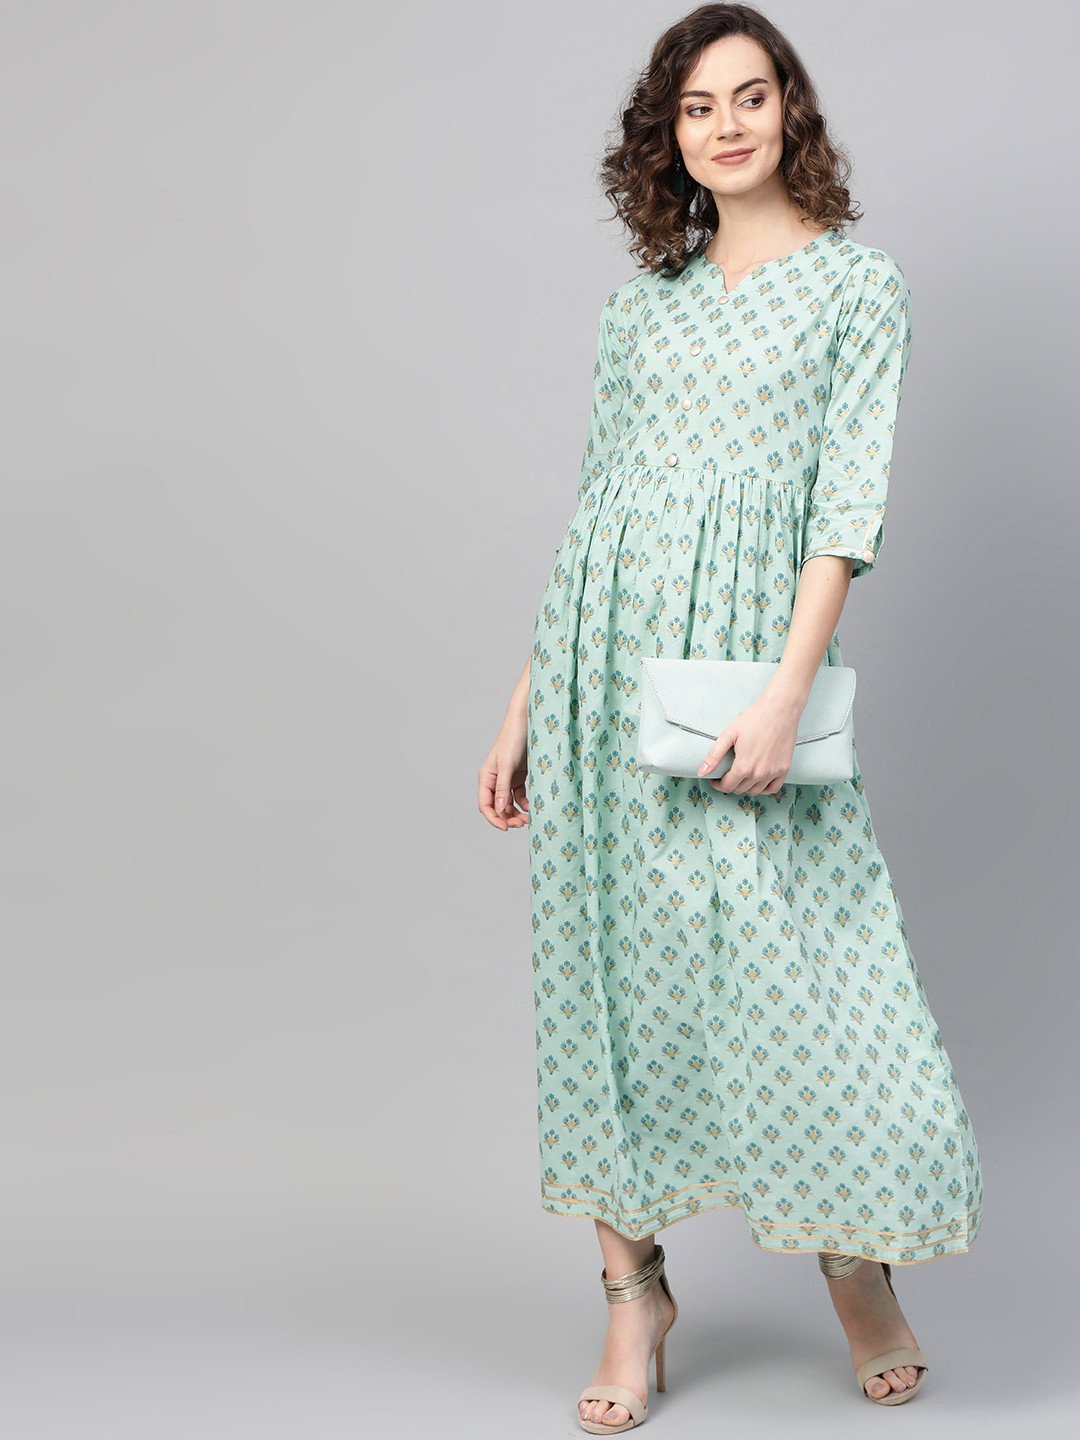 Women's Green & Blue Floral Printed Maxi Dress - Nayo Clothing